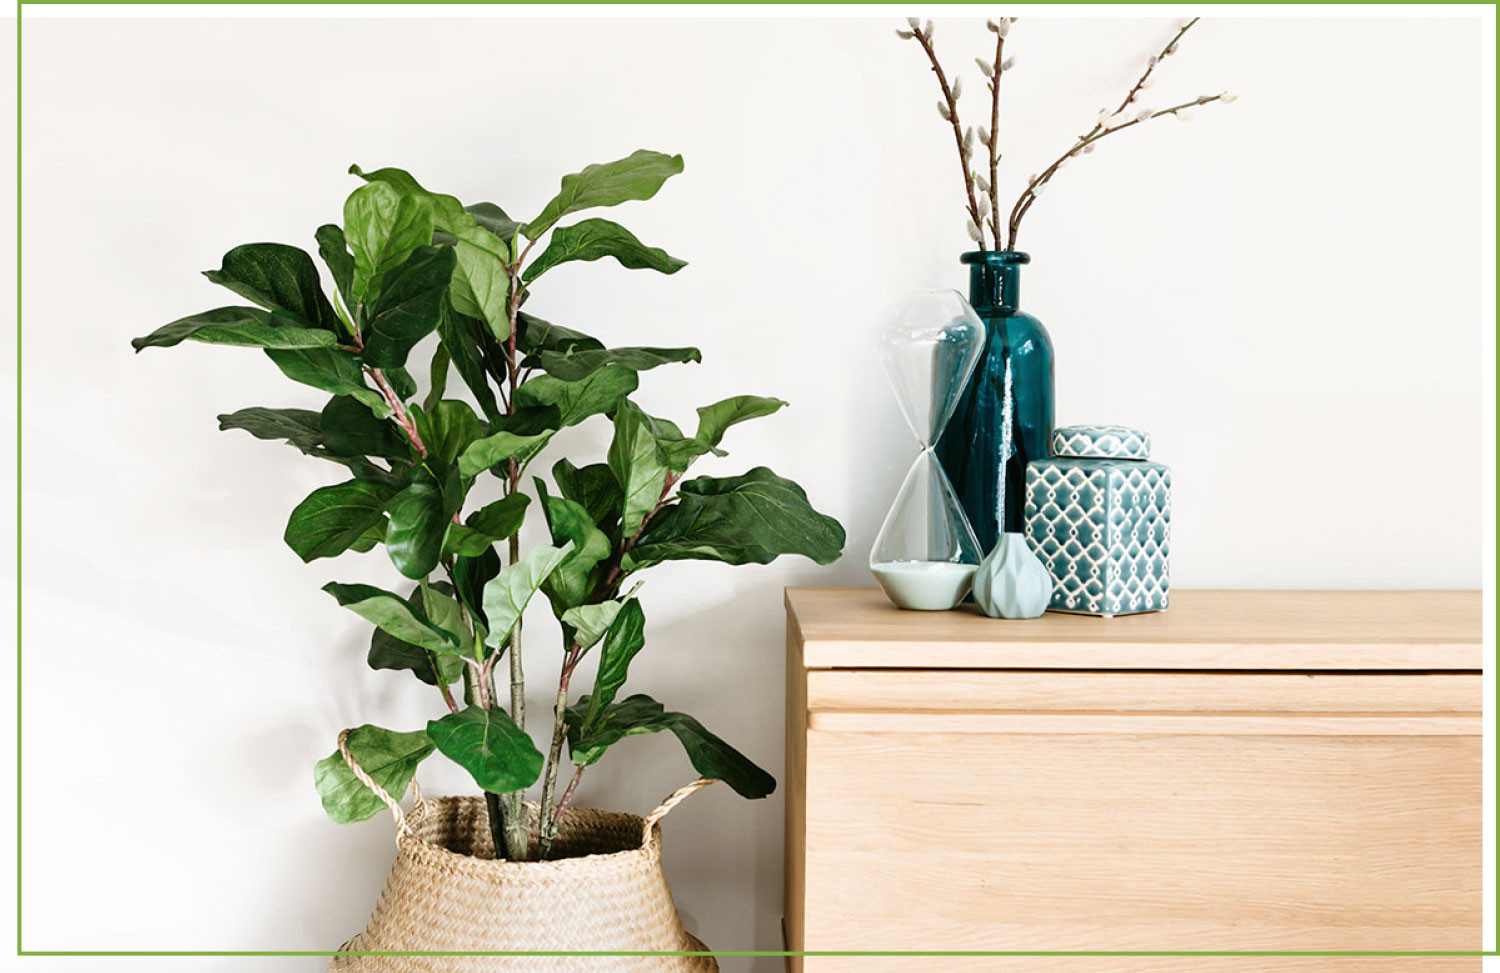 Fiddle Leaf Fig Care Guide: Growing Information And Tips | Proflowers